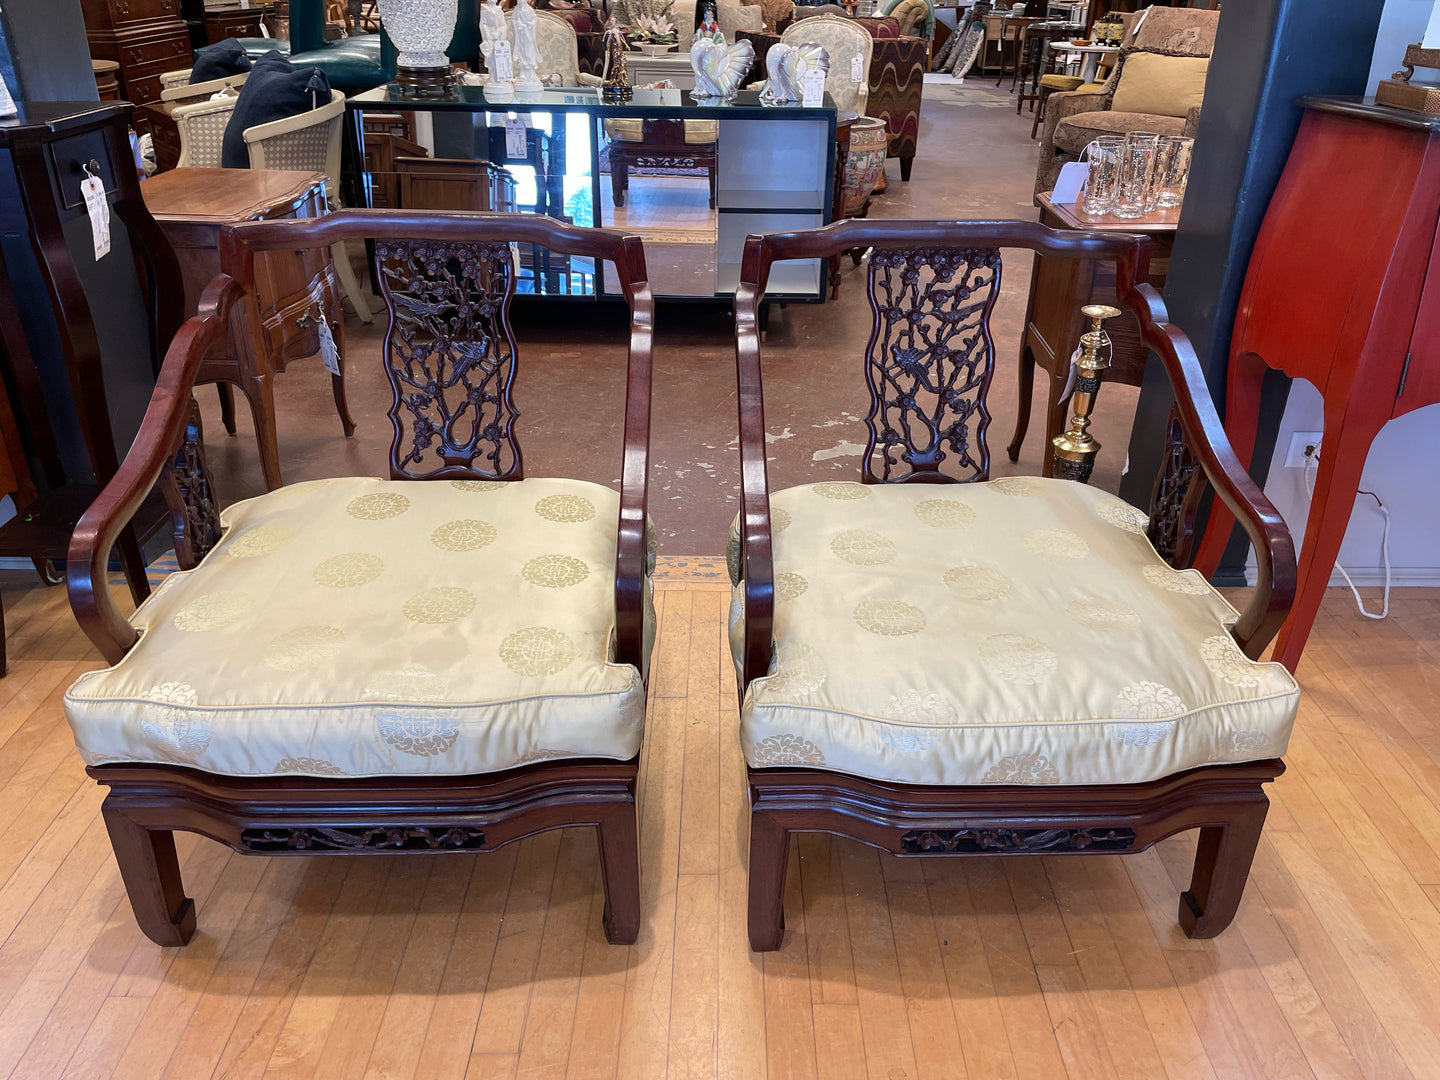 Pair of Asian Inspired Carved Wood Chairs with Upholstered Cushions